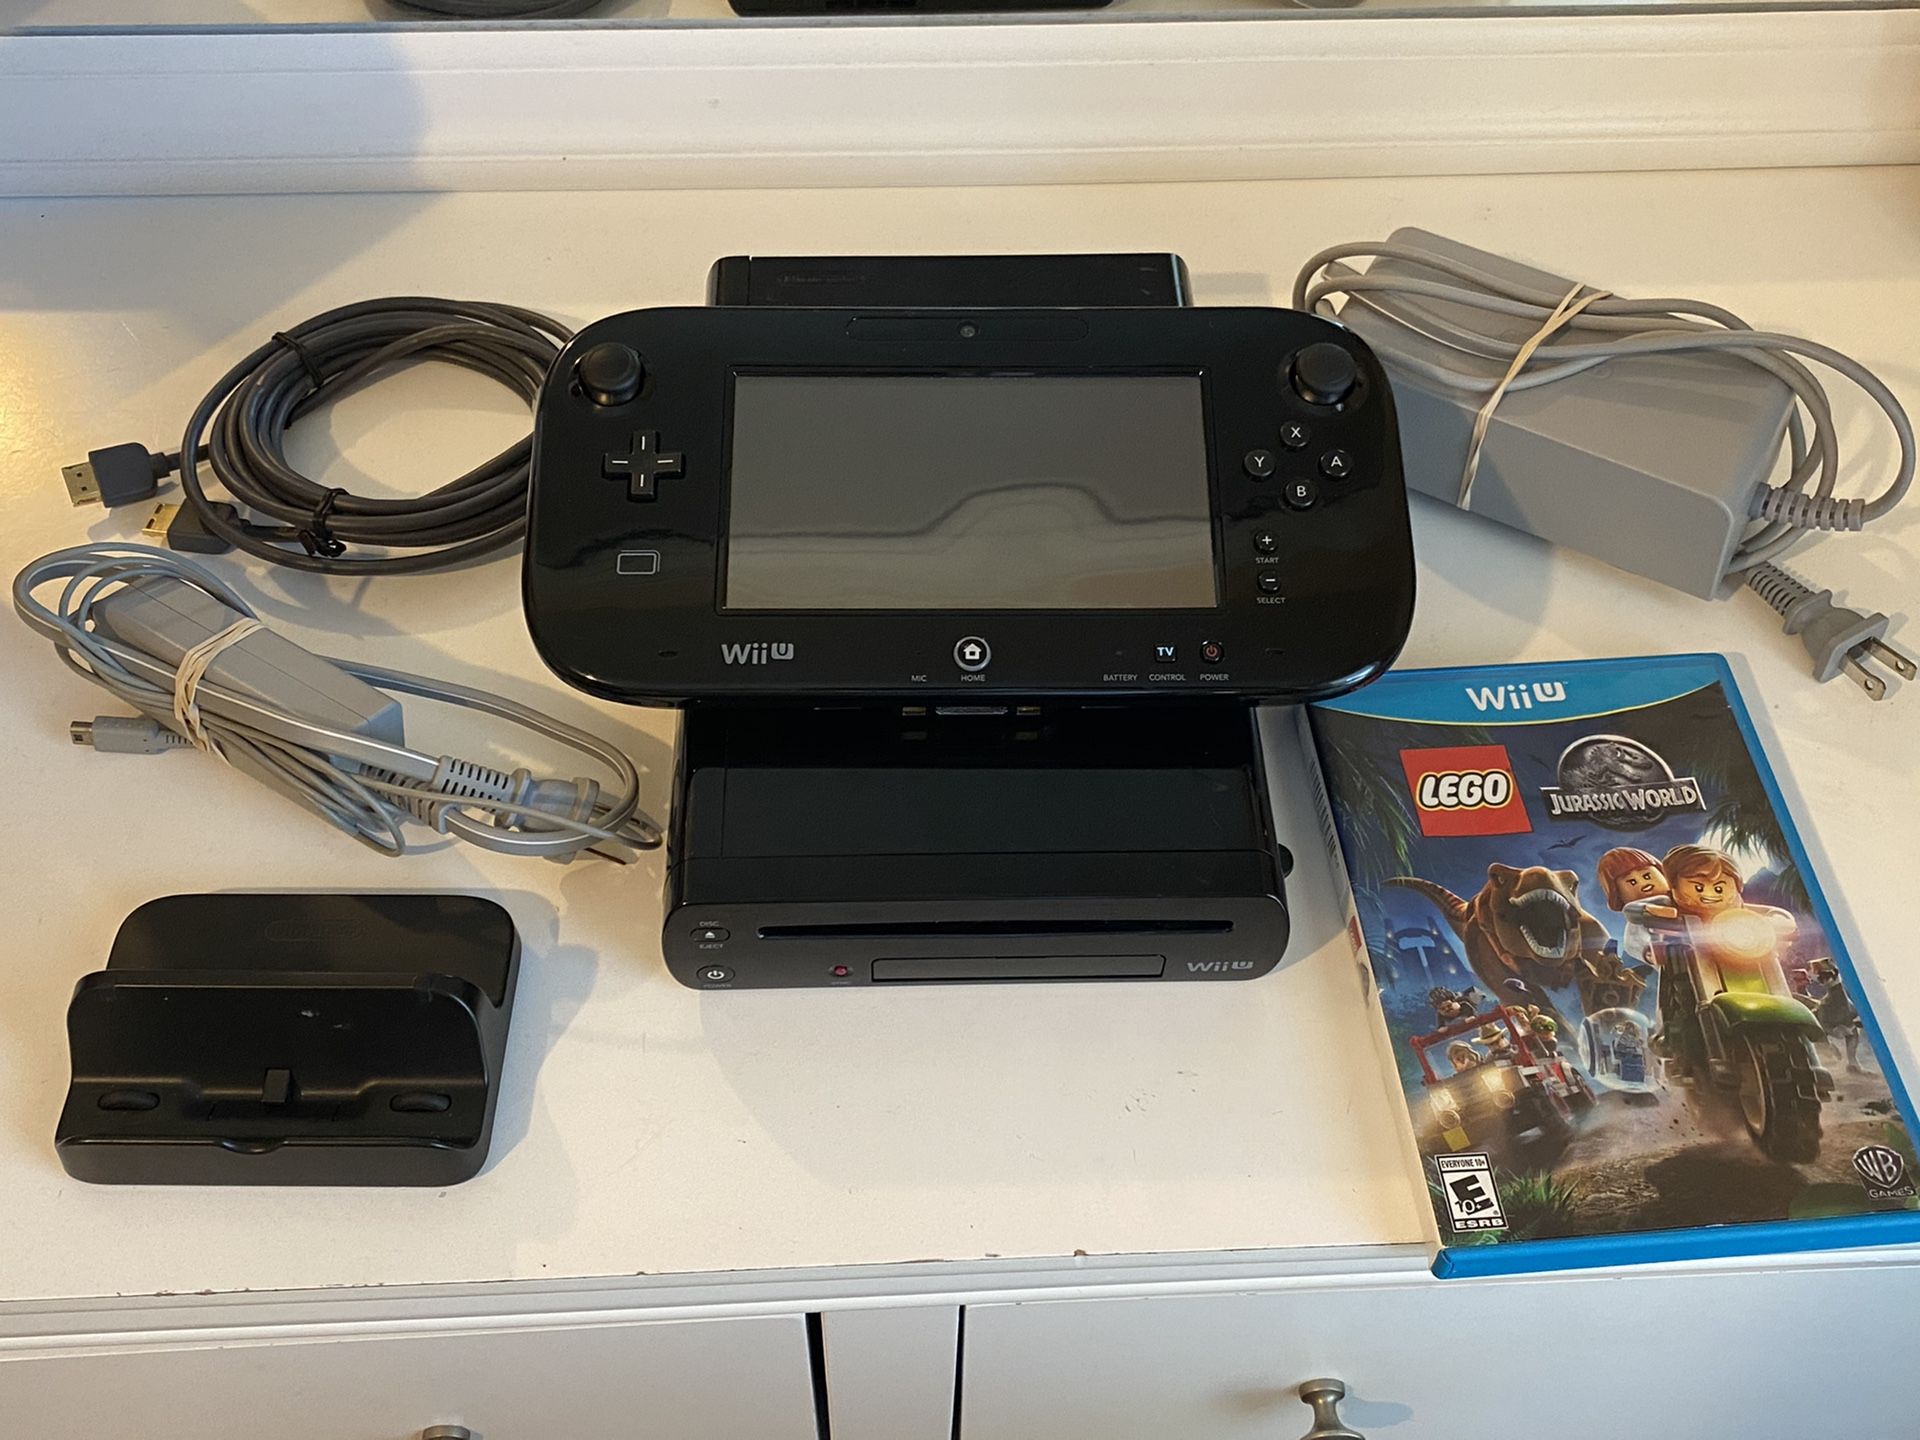 nintendo wii u with 6 pokemon games already downloaded and several other games. in very awesome working condition.